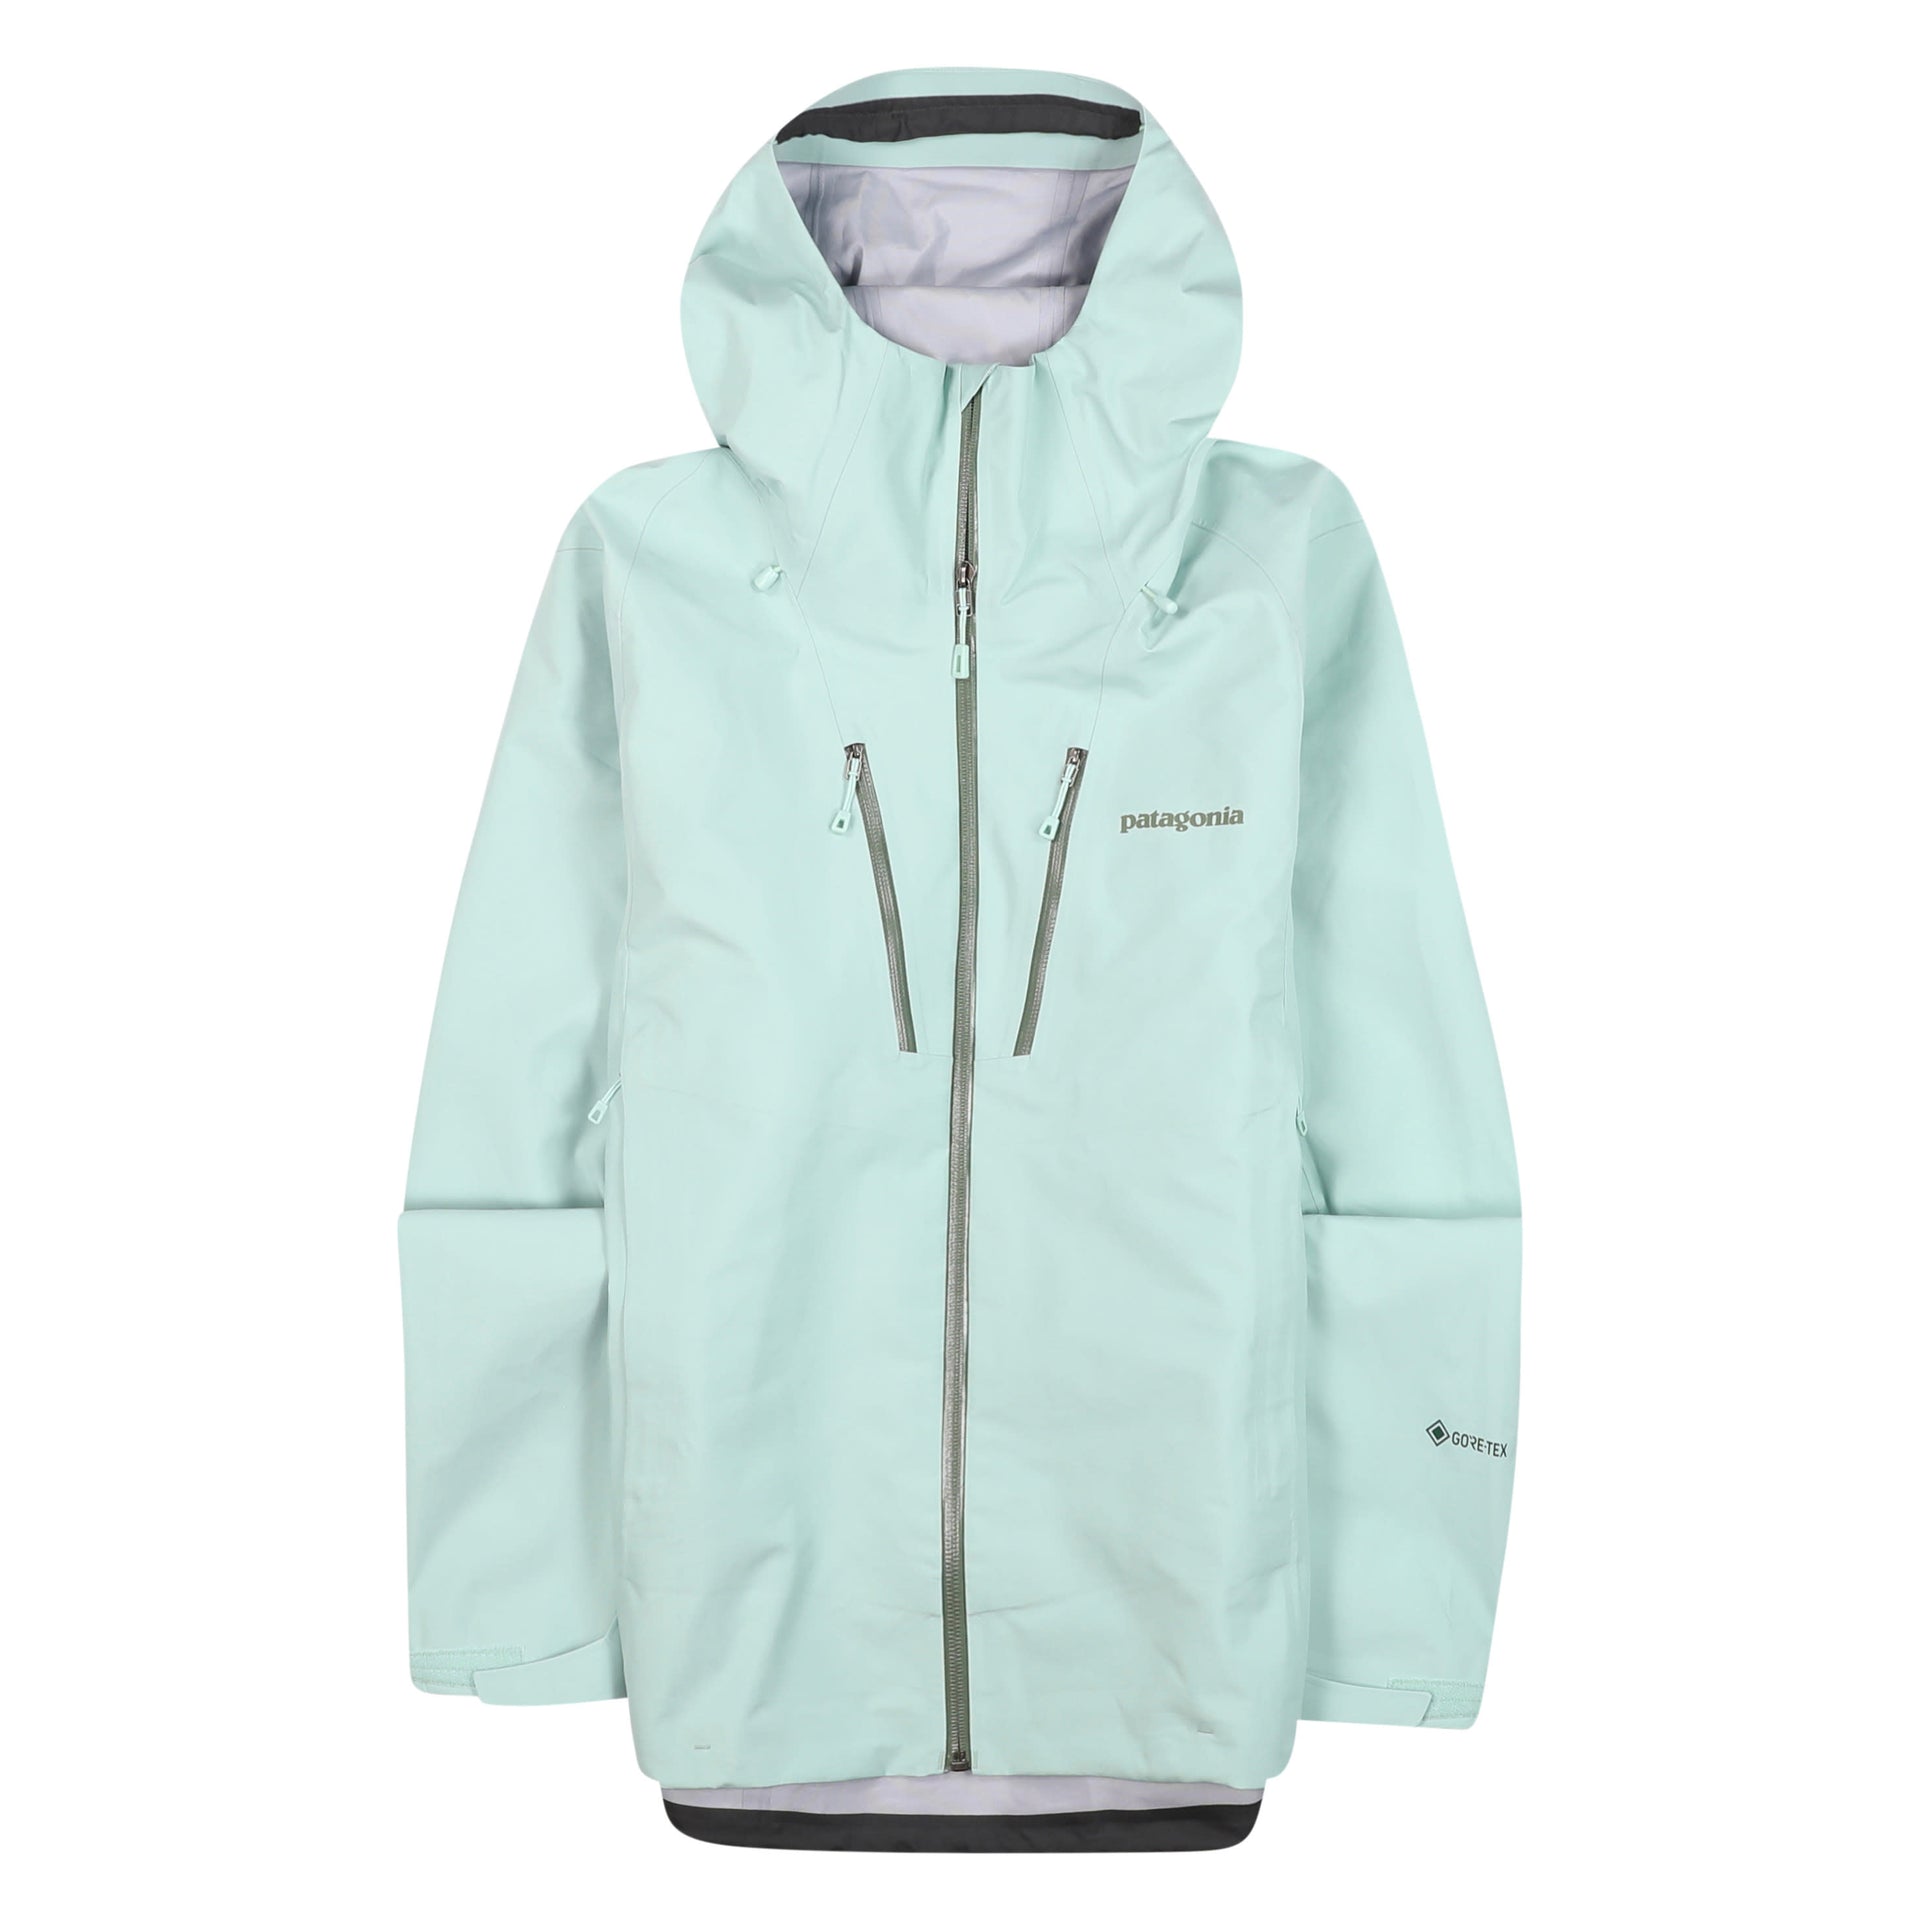 Patagonia M's Triolet Jacket - Wearabouts Clothing Co.